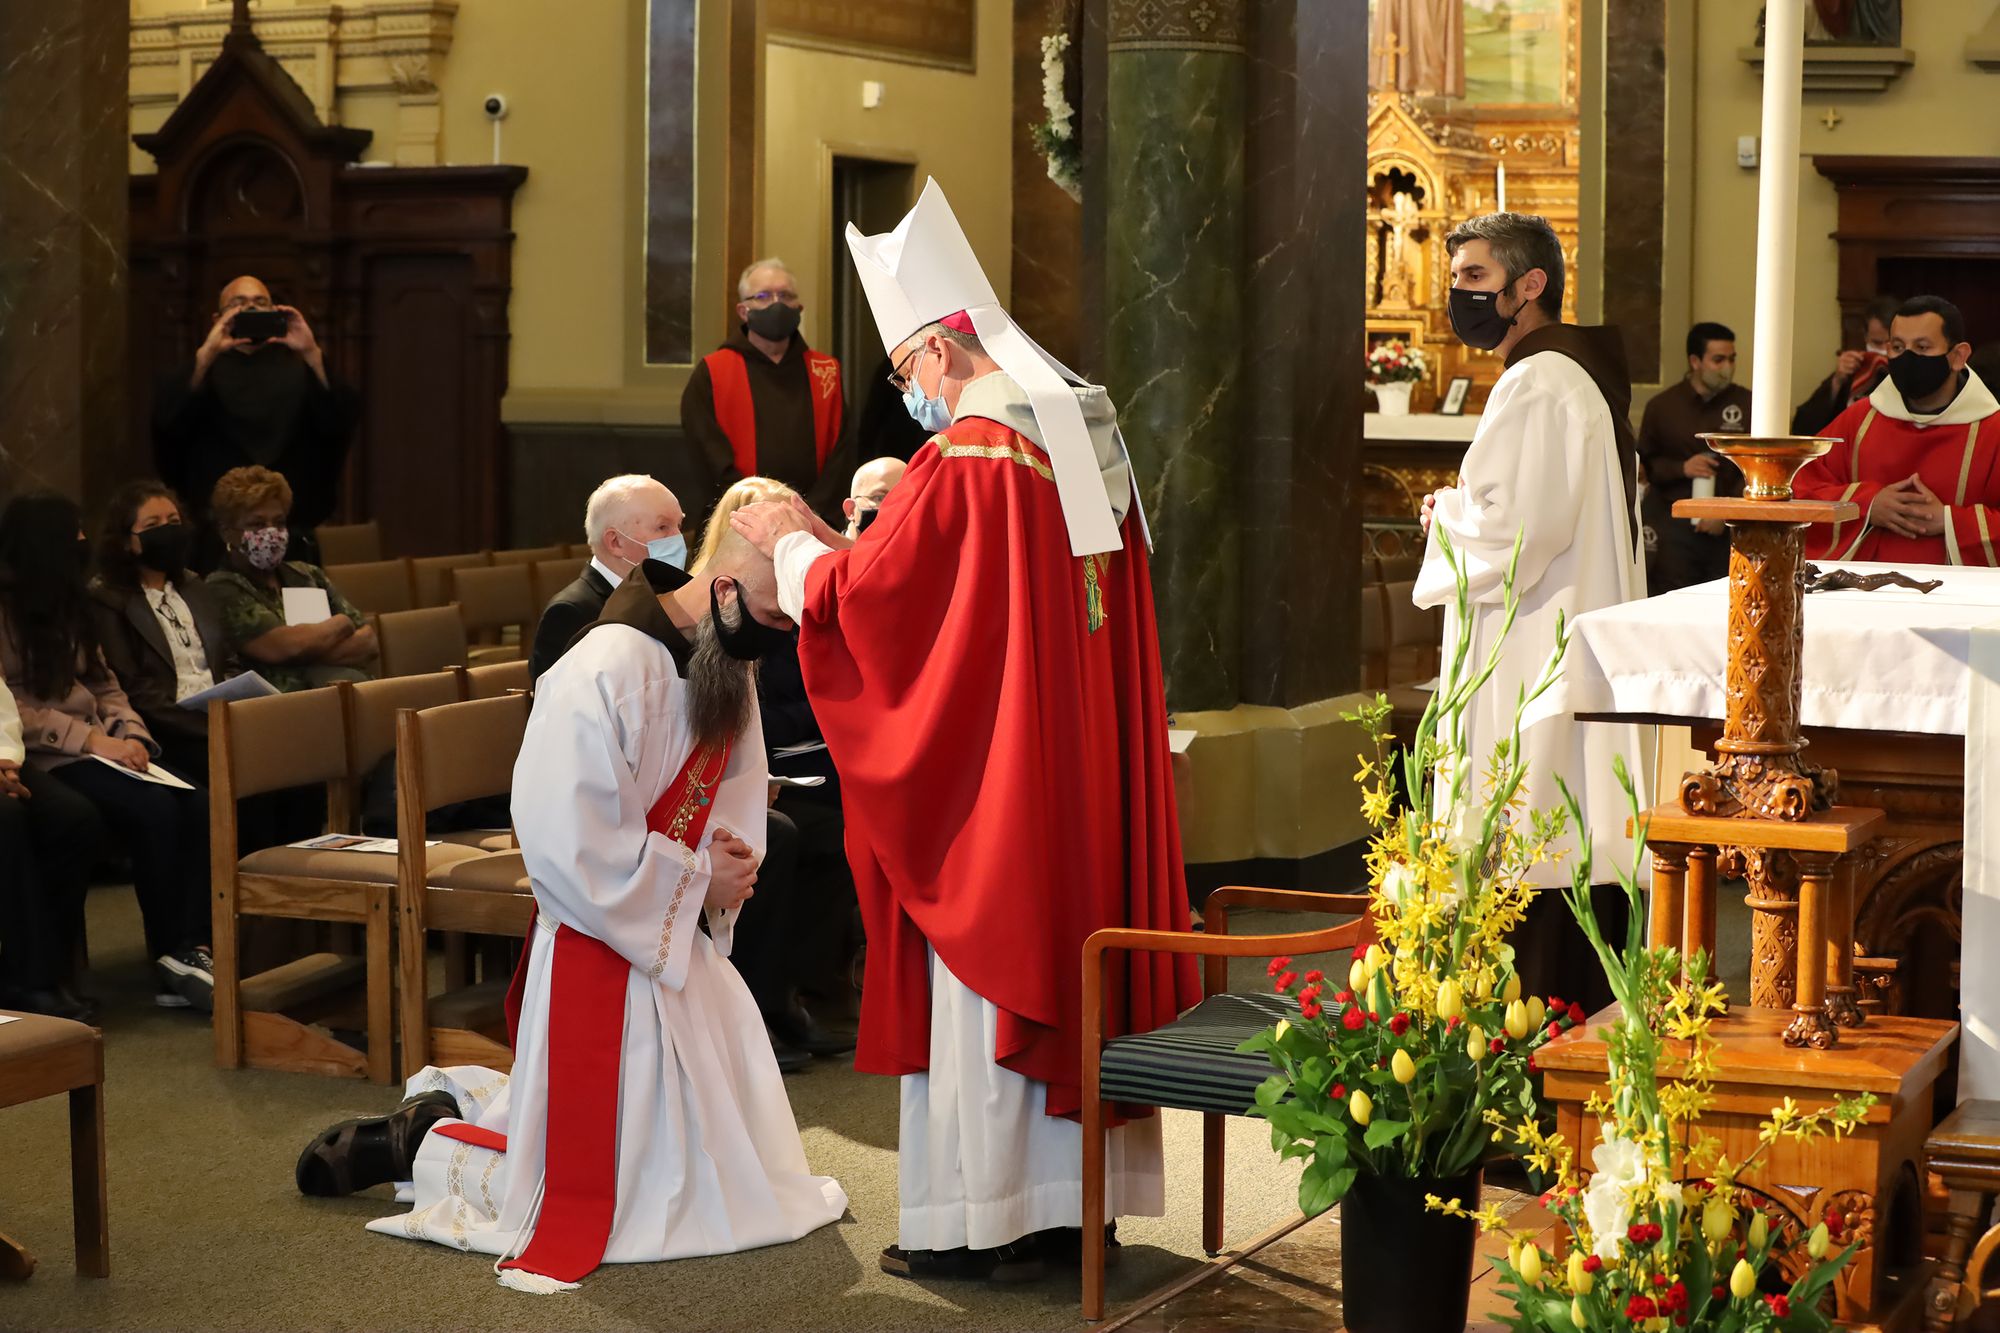 Bishop Lombardo blesses Br. Mike Dorn, OFM Capuchin at his ordination on April 24, 2021